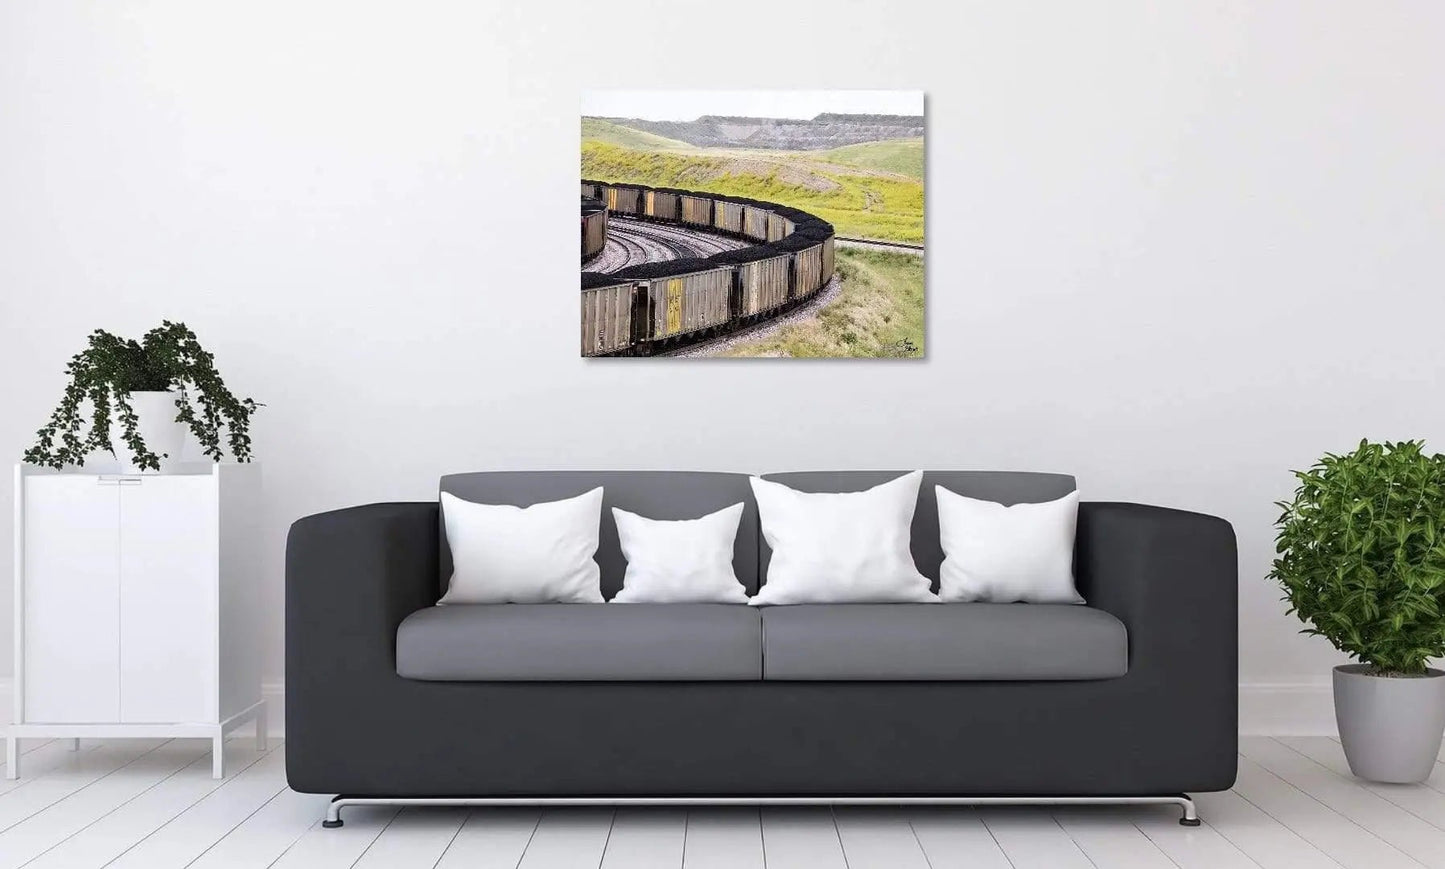 Landscape coal cars on brushed metal wall display above couch